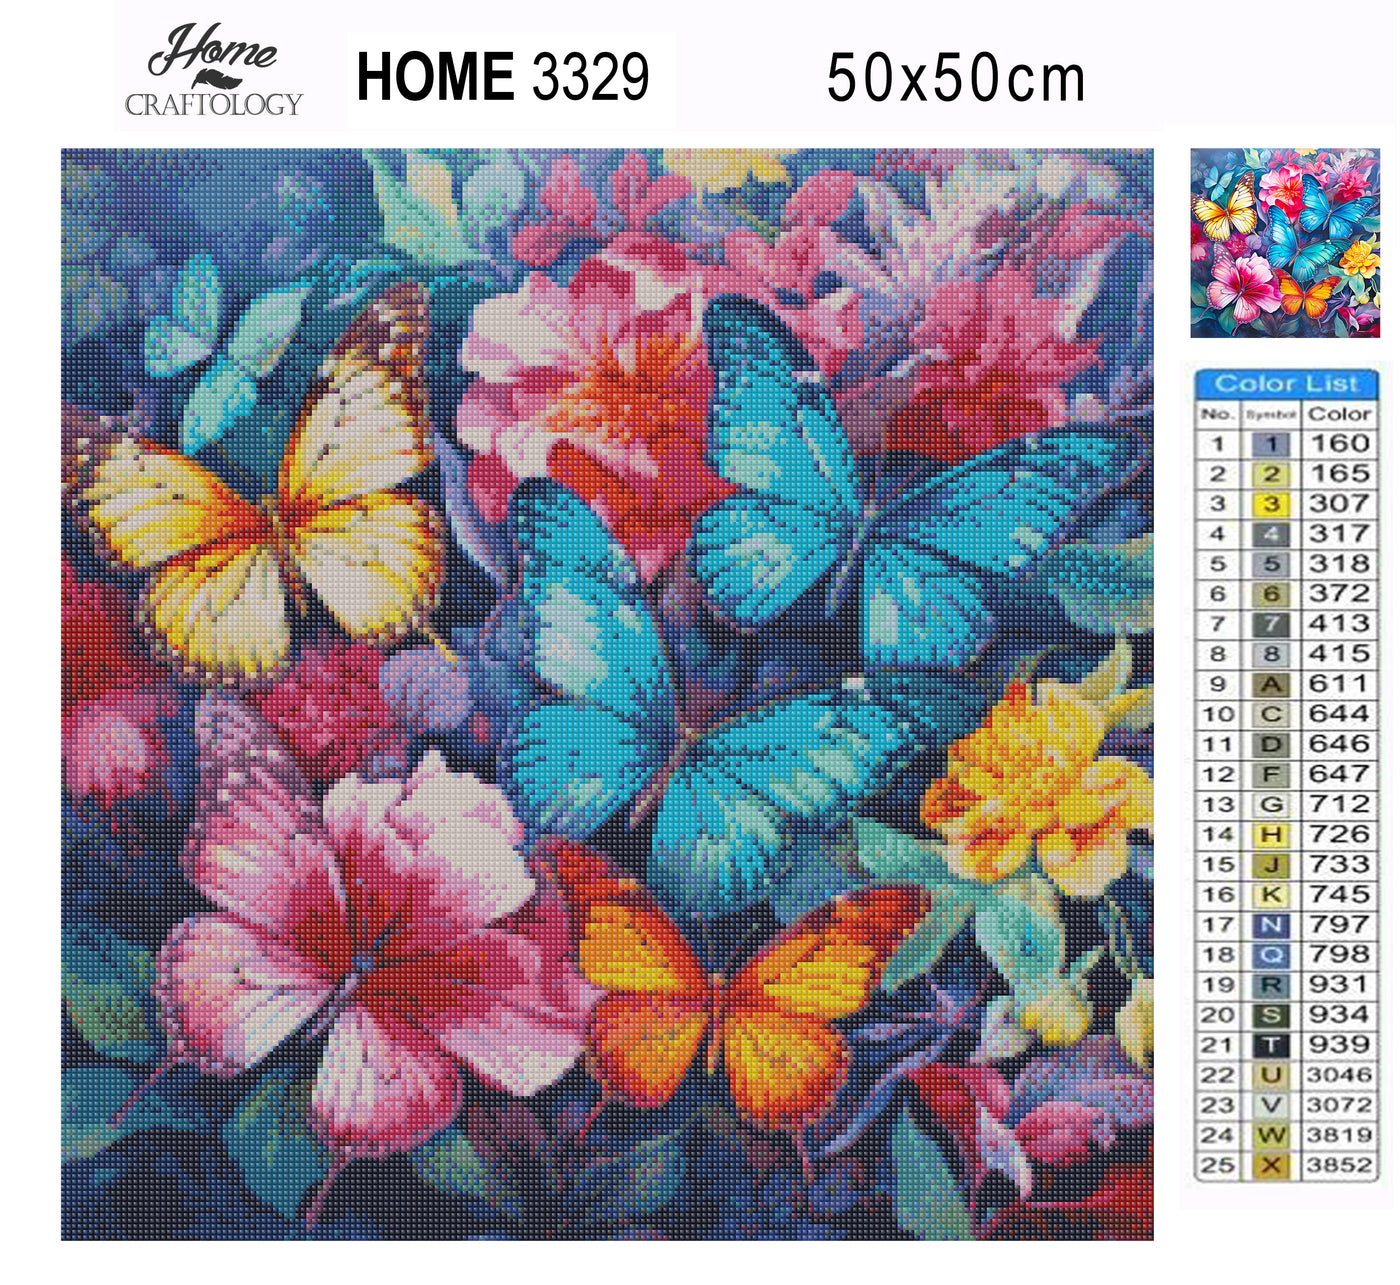 New! Different Butterfly Colors - Premium Diamond Painting Kit